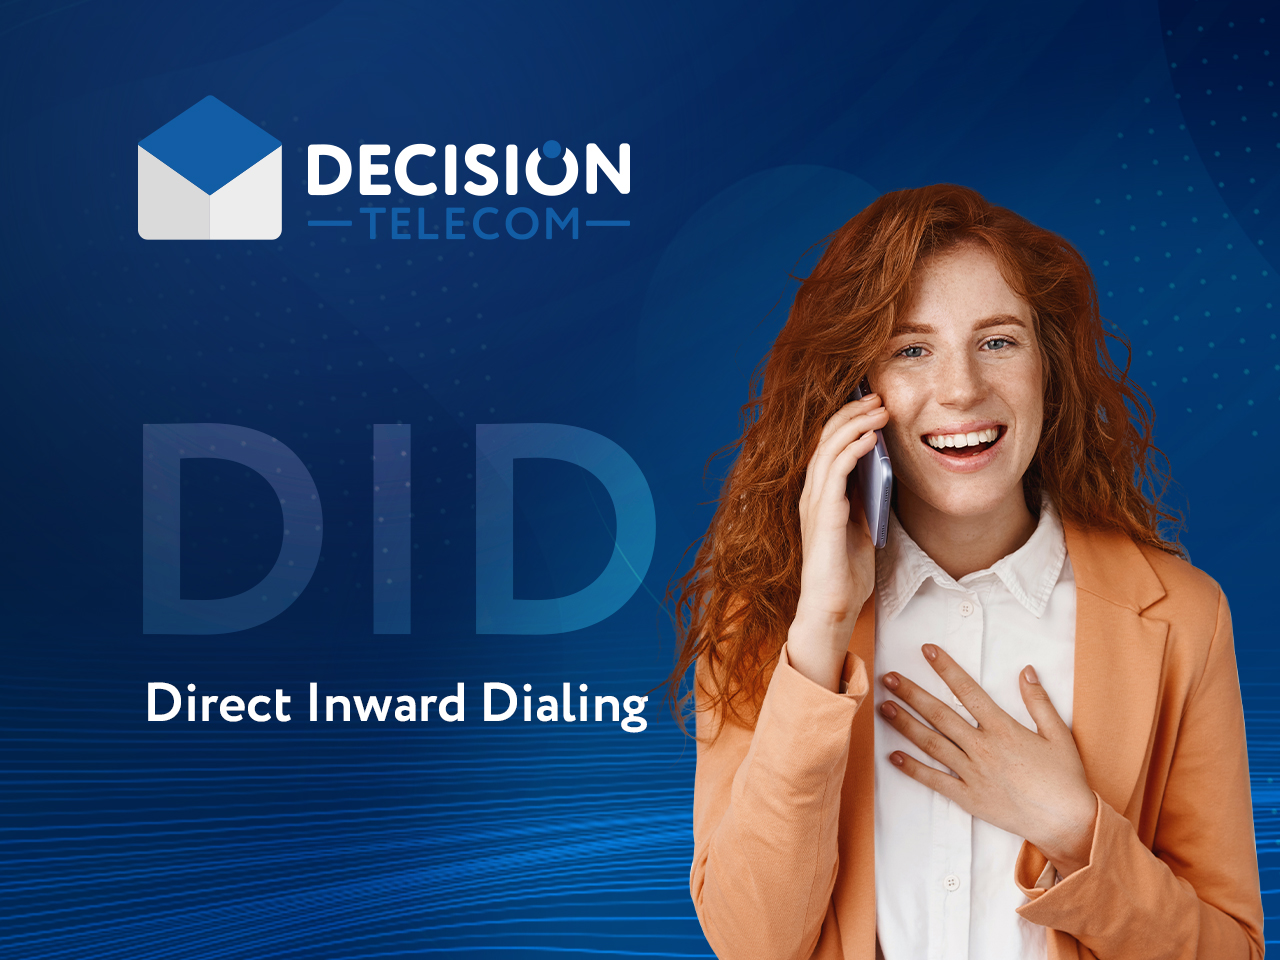 Introducing Direct Inward Dialing from Decision Telecom